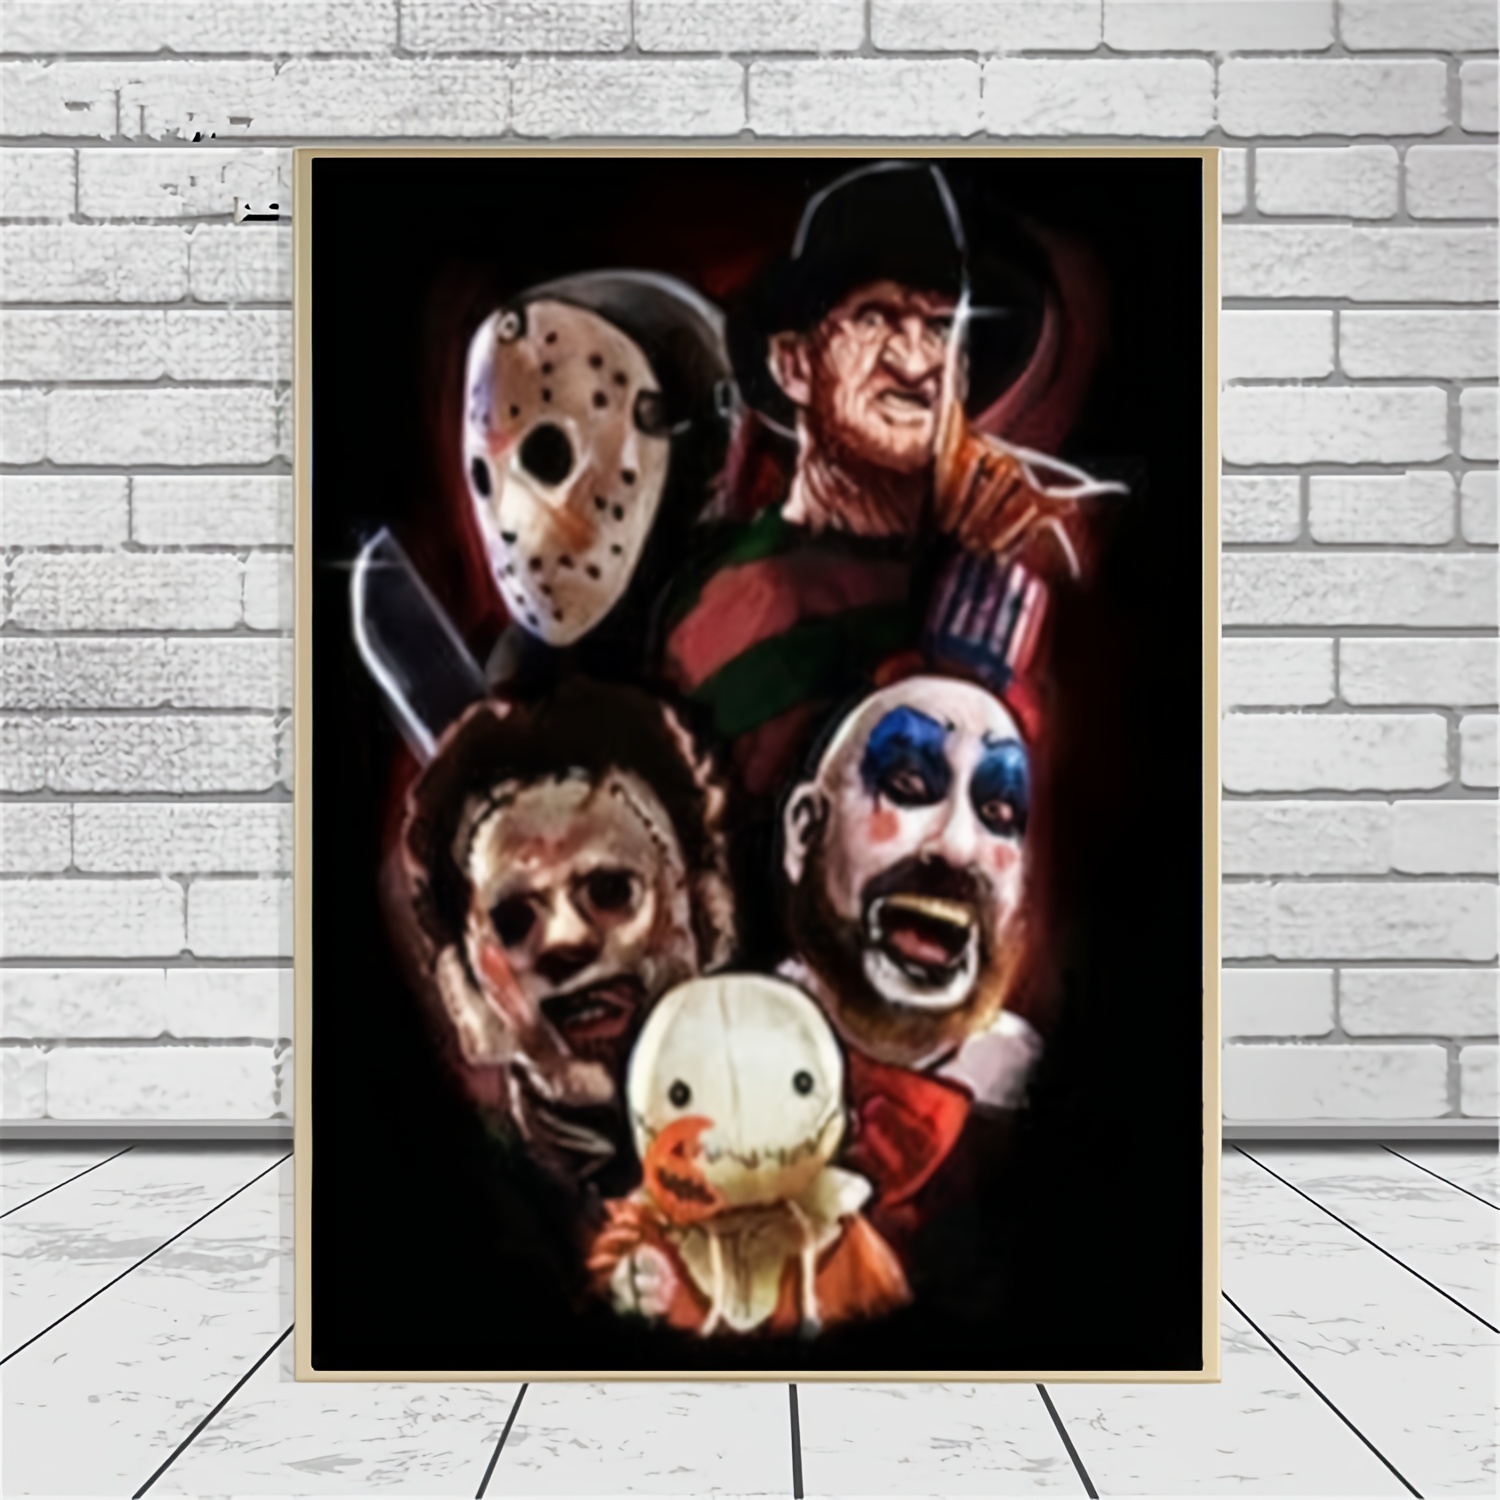 5D Diamond DIY Painting Embroidery Drill Cross Stitch Horror Movie Mask